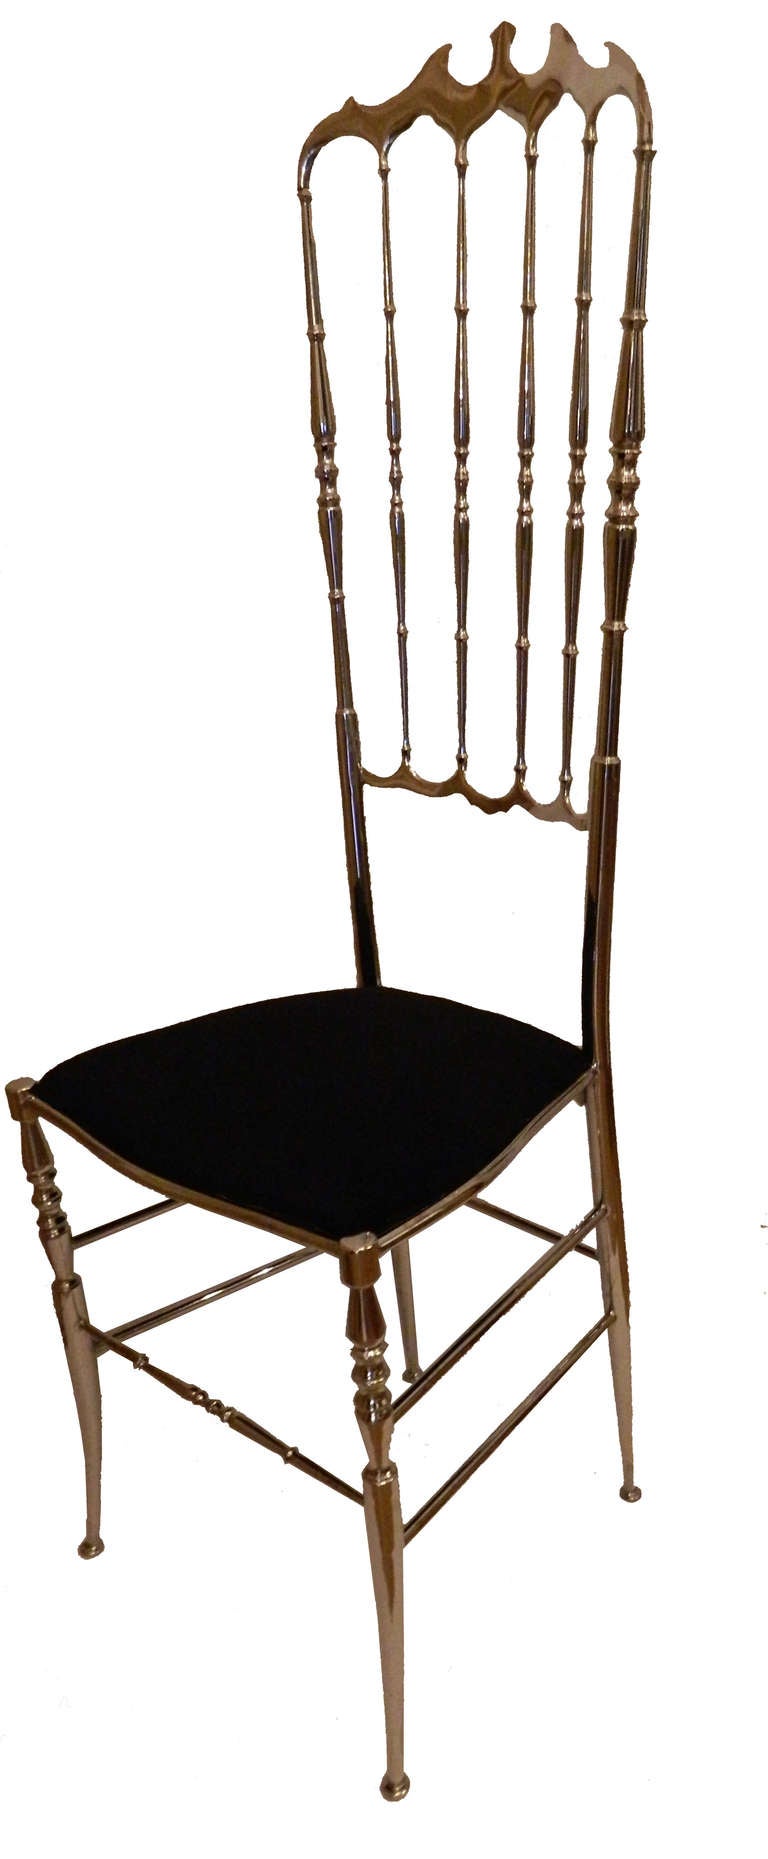 Exceptional set of eight Italian very high back nickel-plated Chiavari chairs.
Black ultrasuede top seat. (Only six pictured.)
Similar chairs are at the 